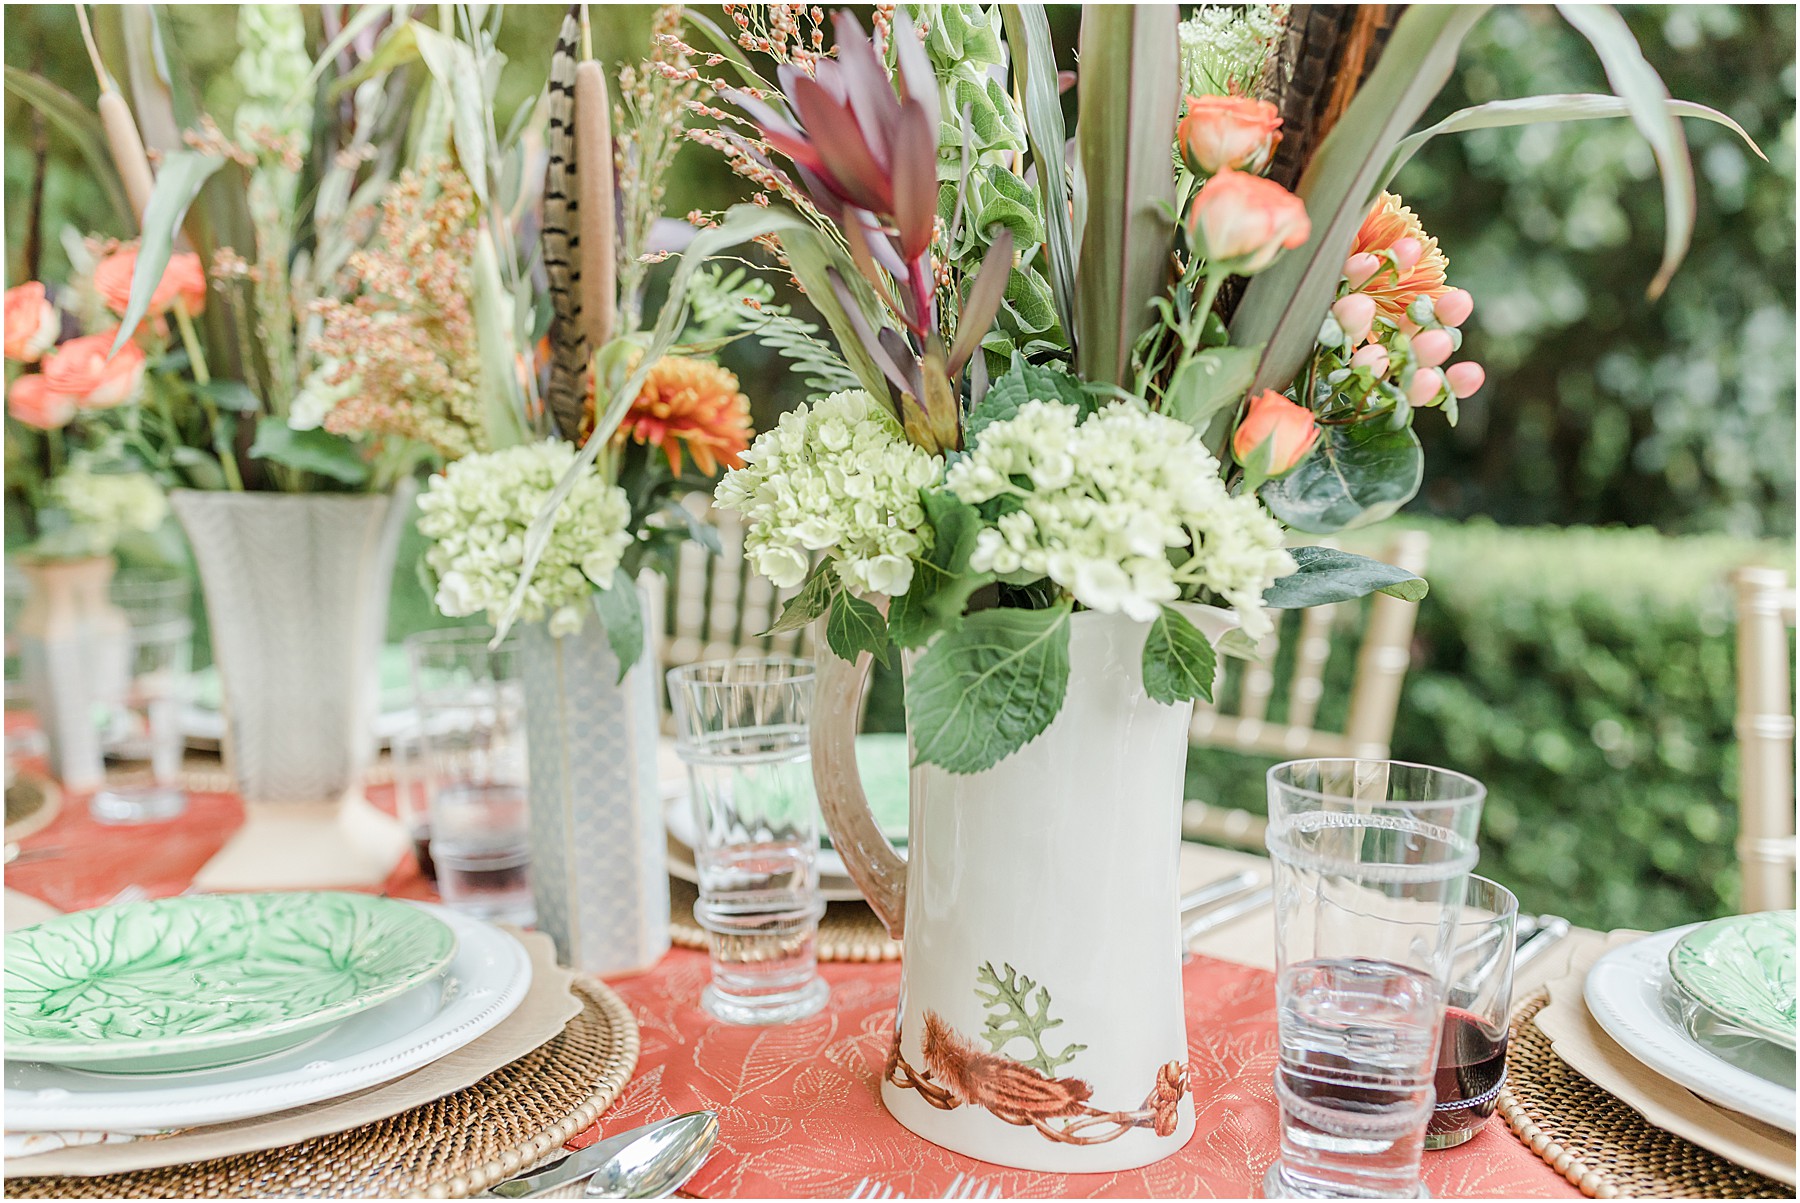 A close up of a vase and flowers on a fall inspired table setting.